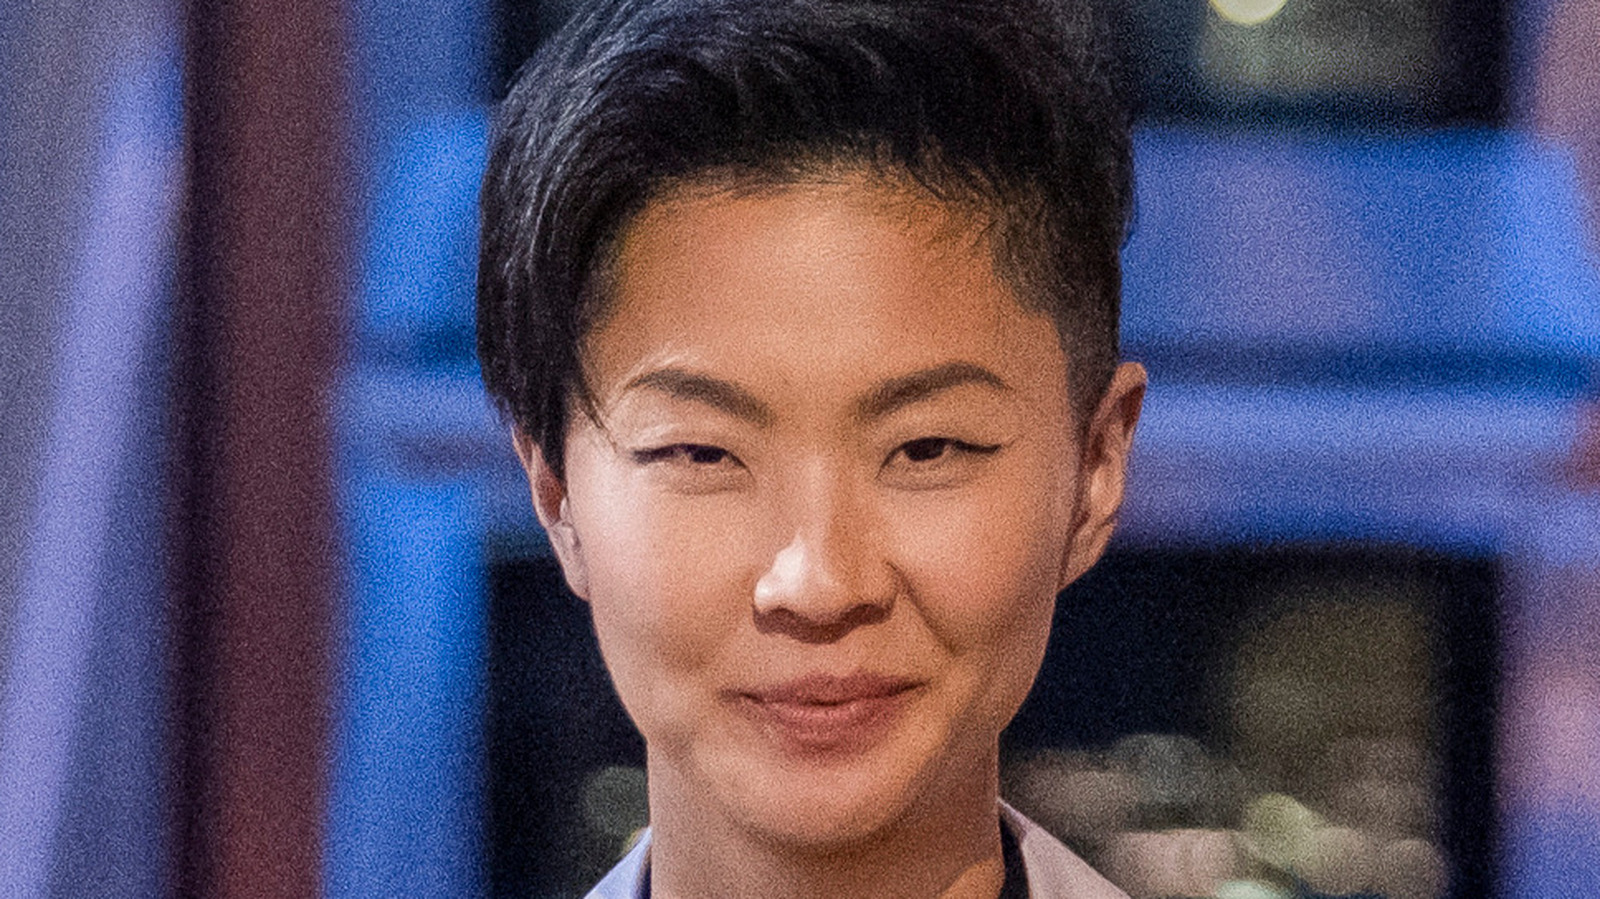 Kristen Kish On Iron Chef Quest For An Iron Legend And Her New Role